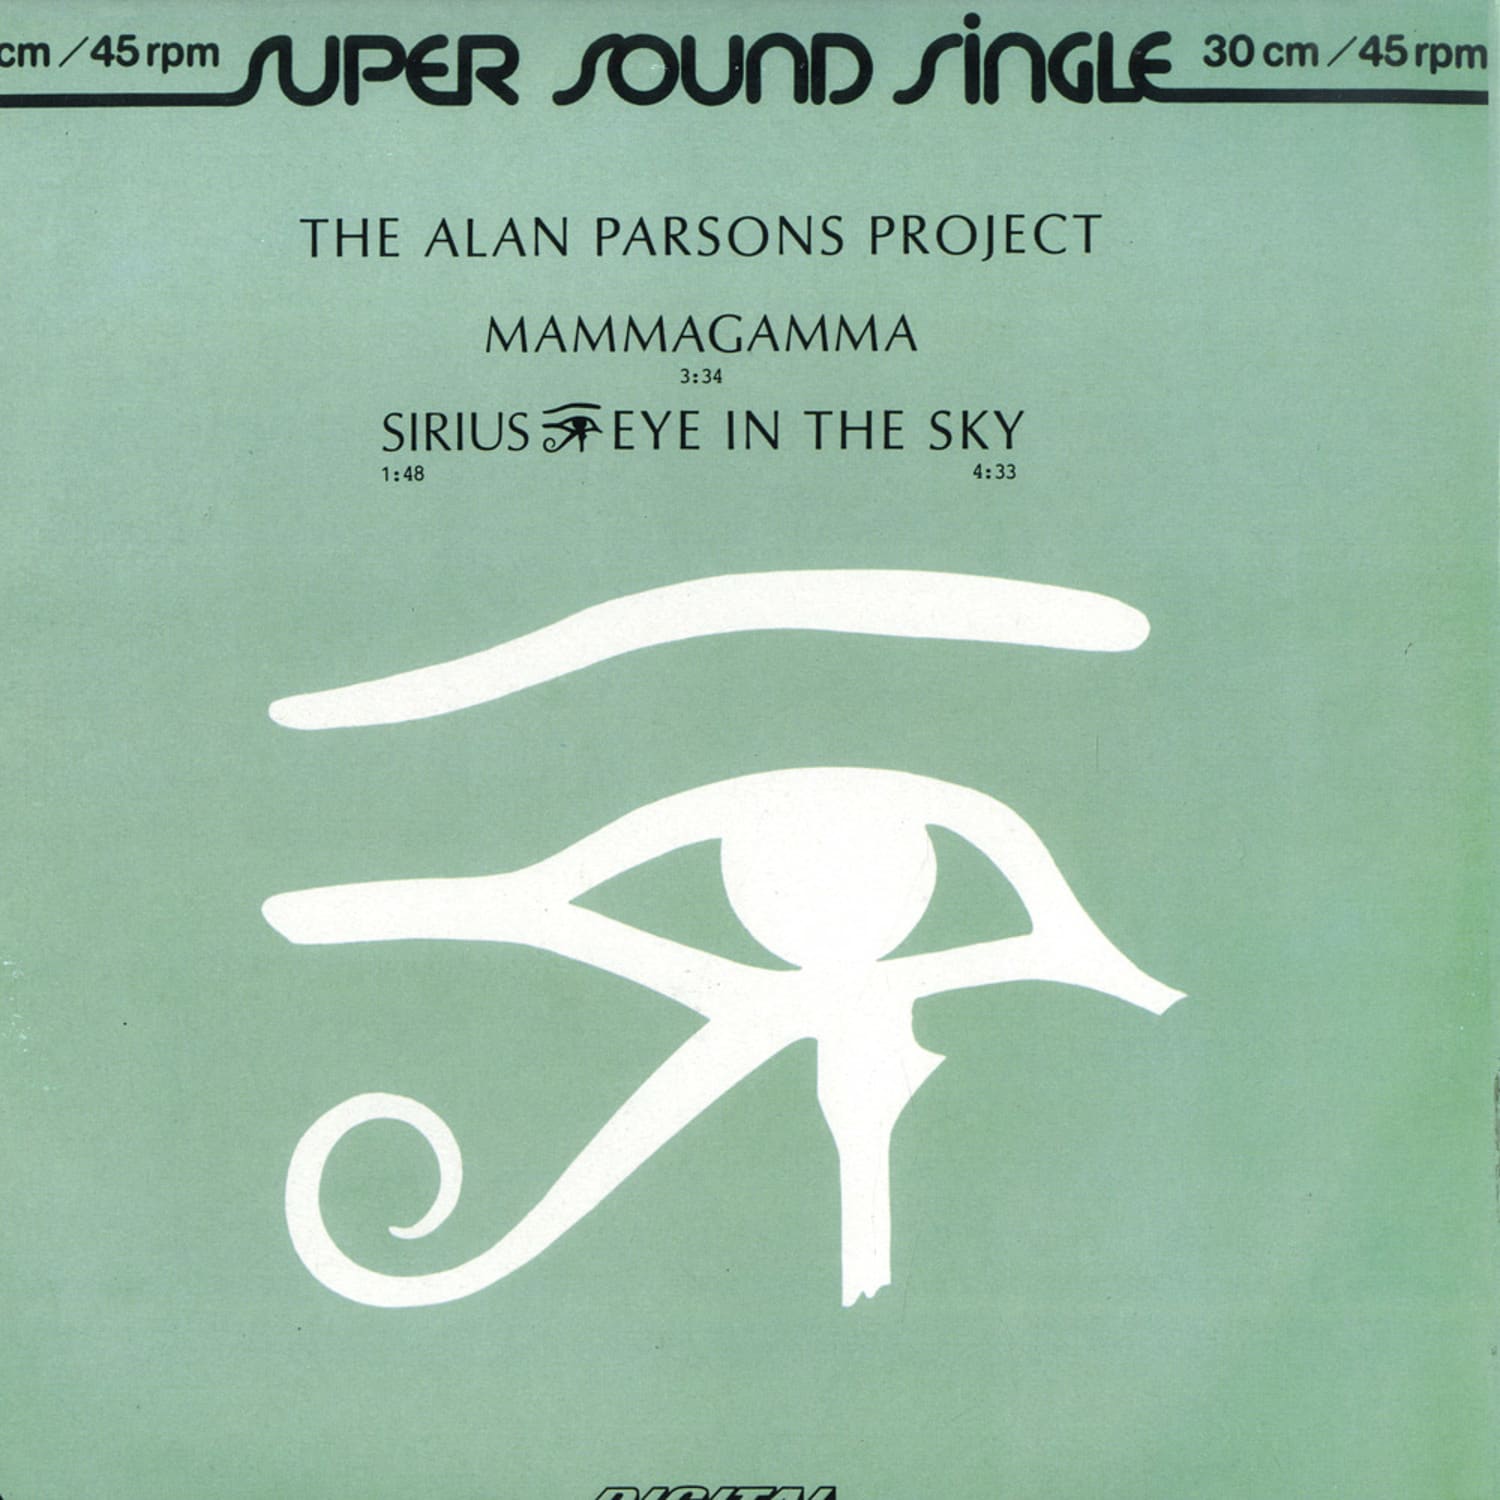 The Alan Parsons Project - EYE IN THE SKY